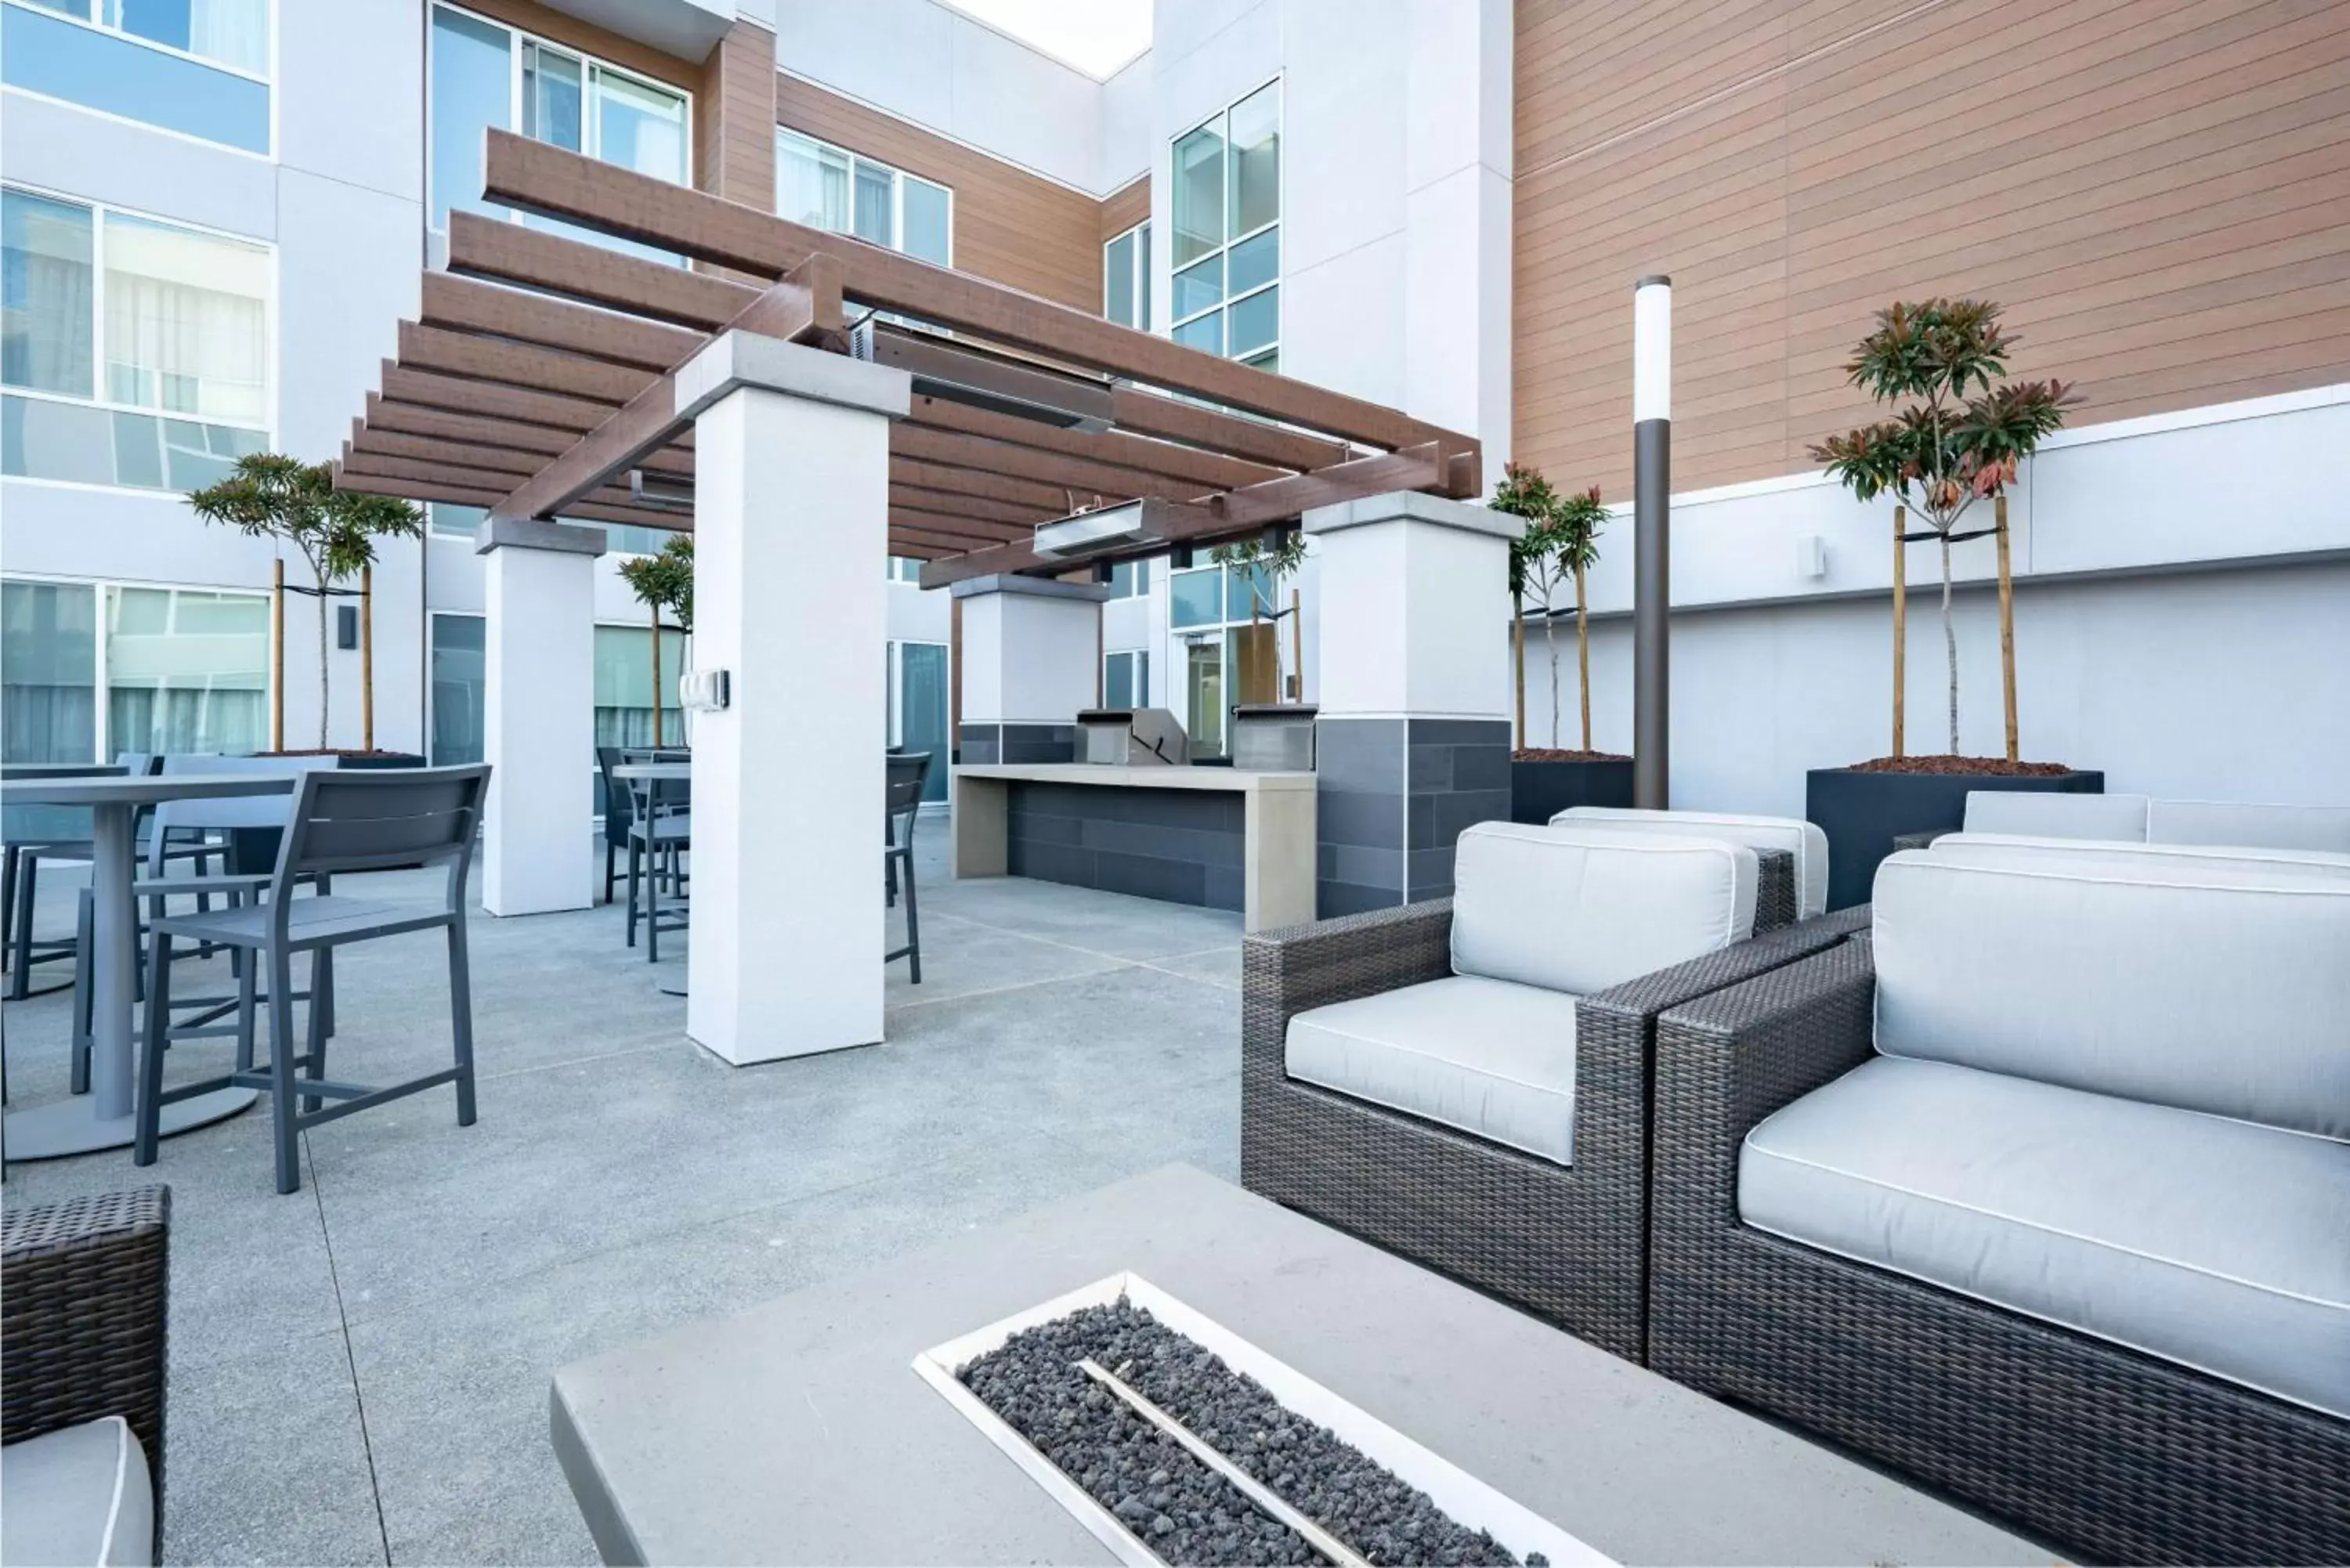 Patio in Homewood Suites By Hilton Sunnyvale-Silicon Valley, Ca